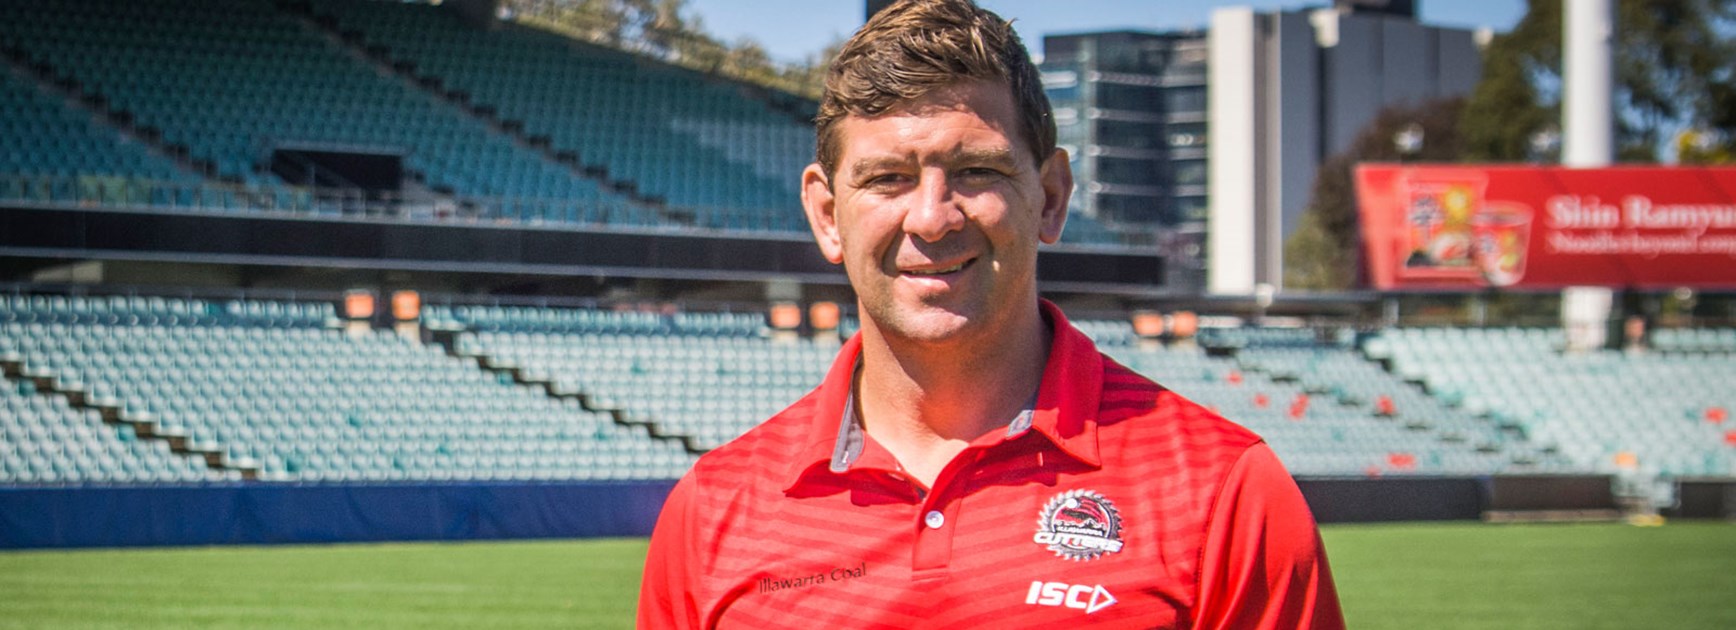 Illawarra Cutters coach Jason Demetriou could add another title to his impressive resume as his side prepare for the Intrust Super Premiership Grand Final.